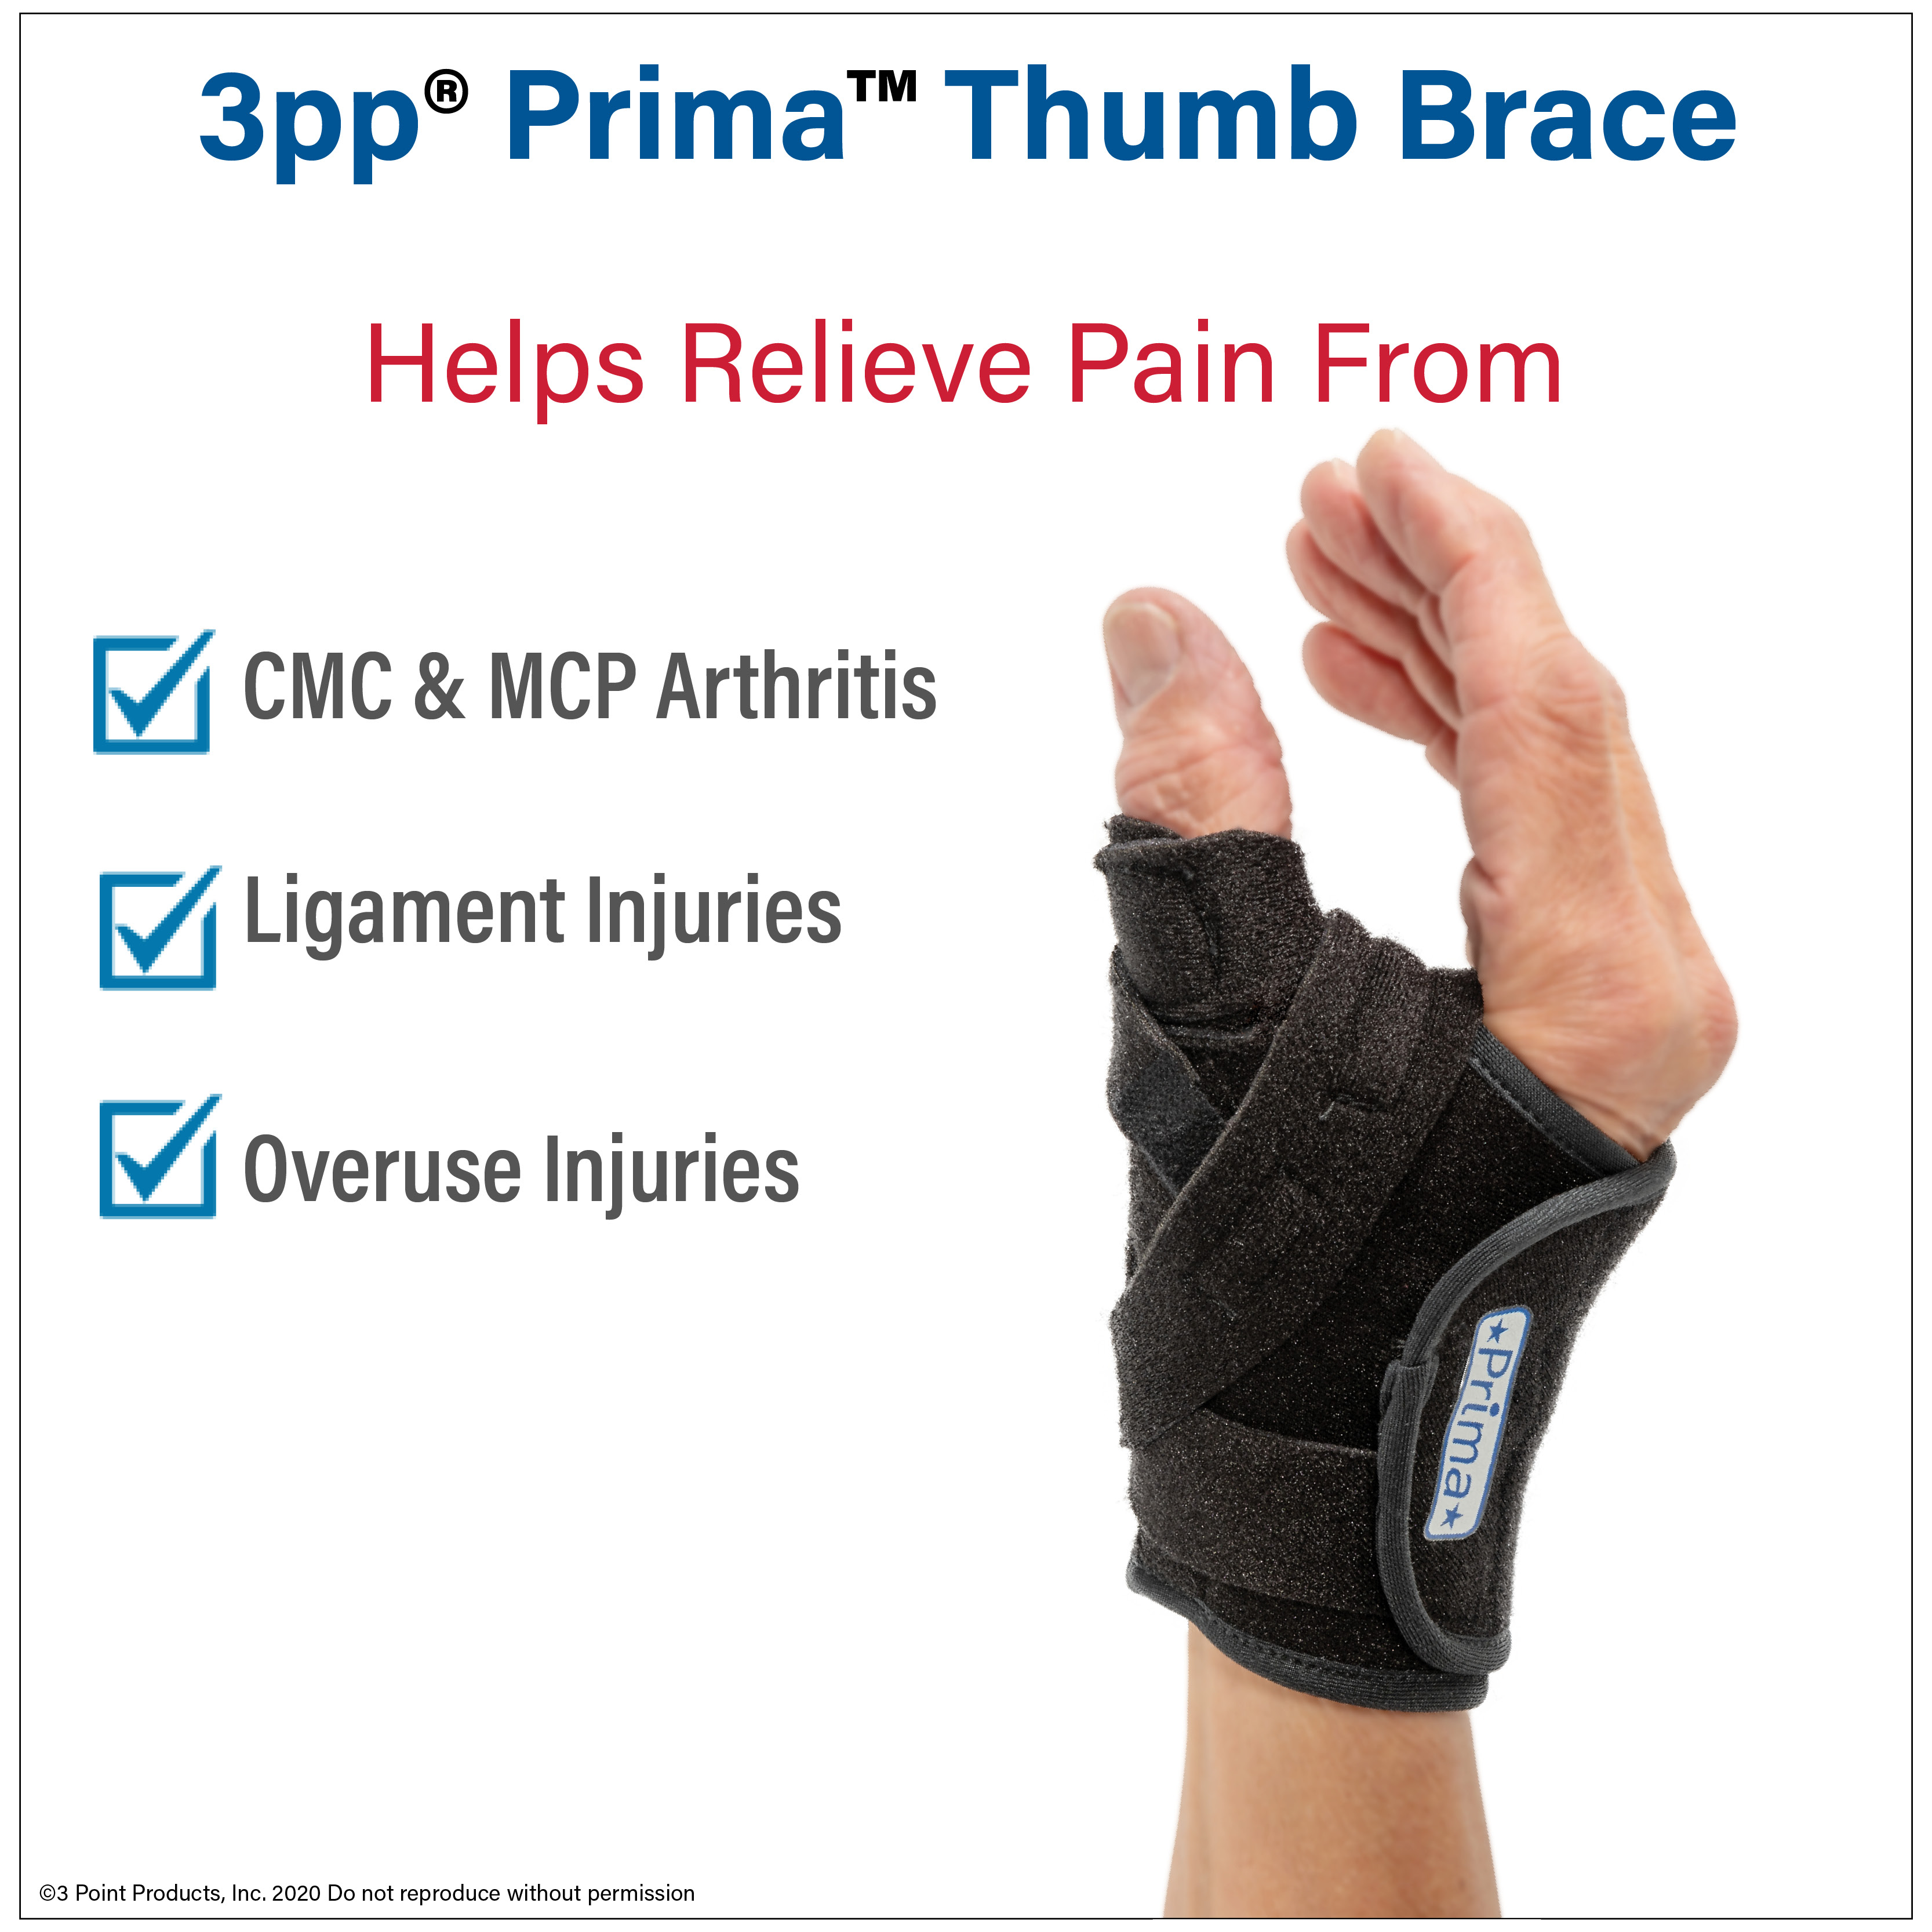 3pp Prima Thumb Brace Relieves Pain from CMC & MCP Arthritis, Ligament Injuries and Overuse Injuries